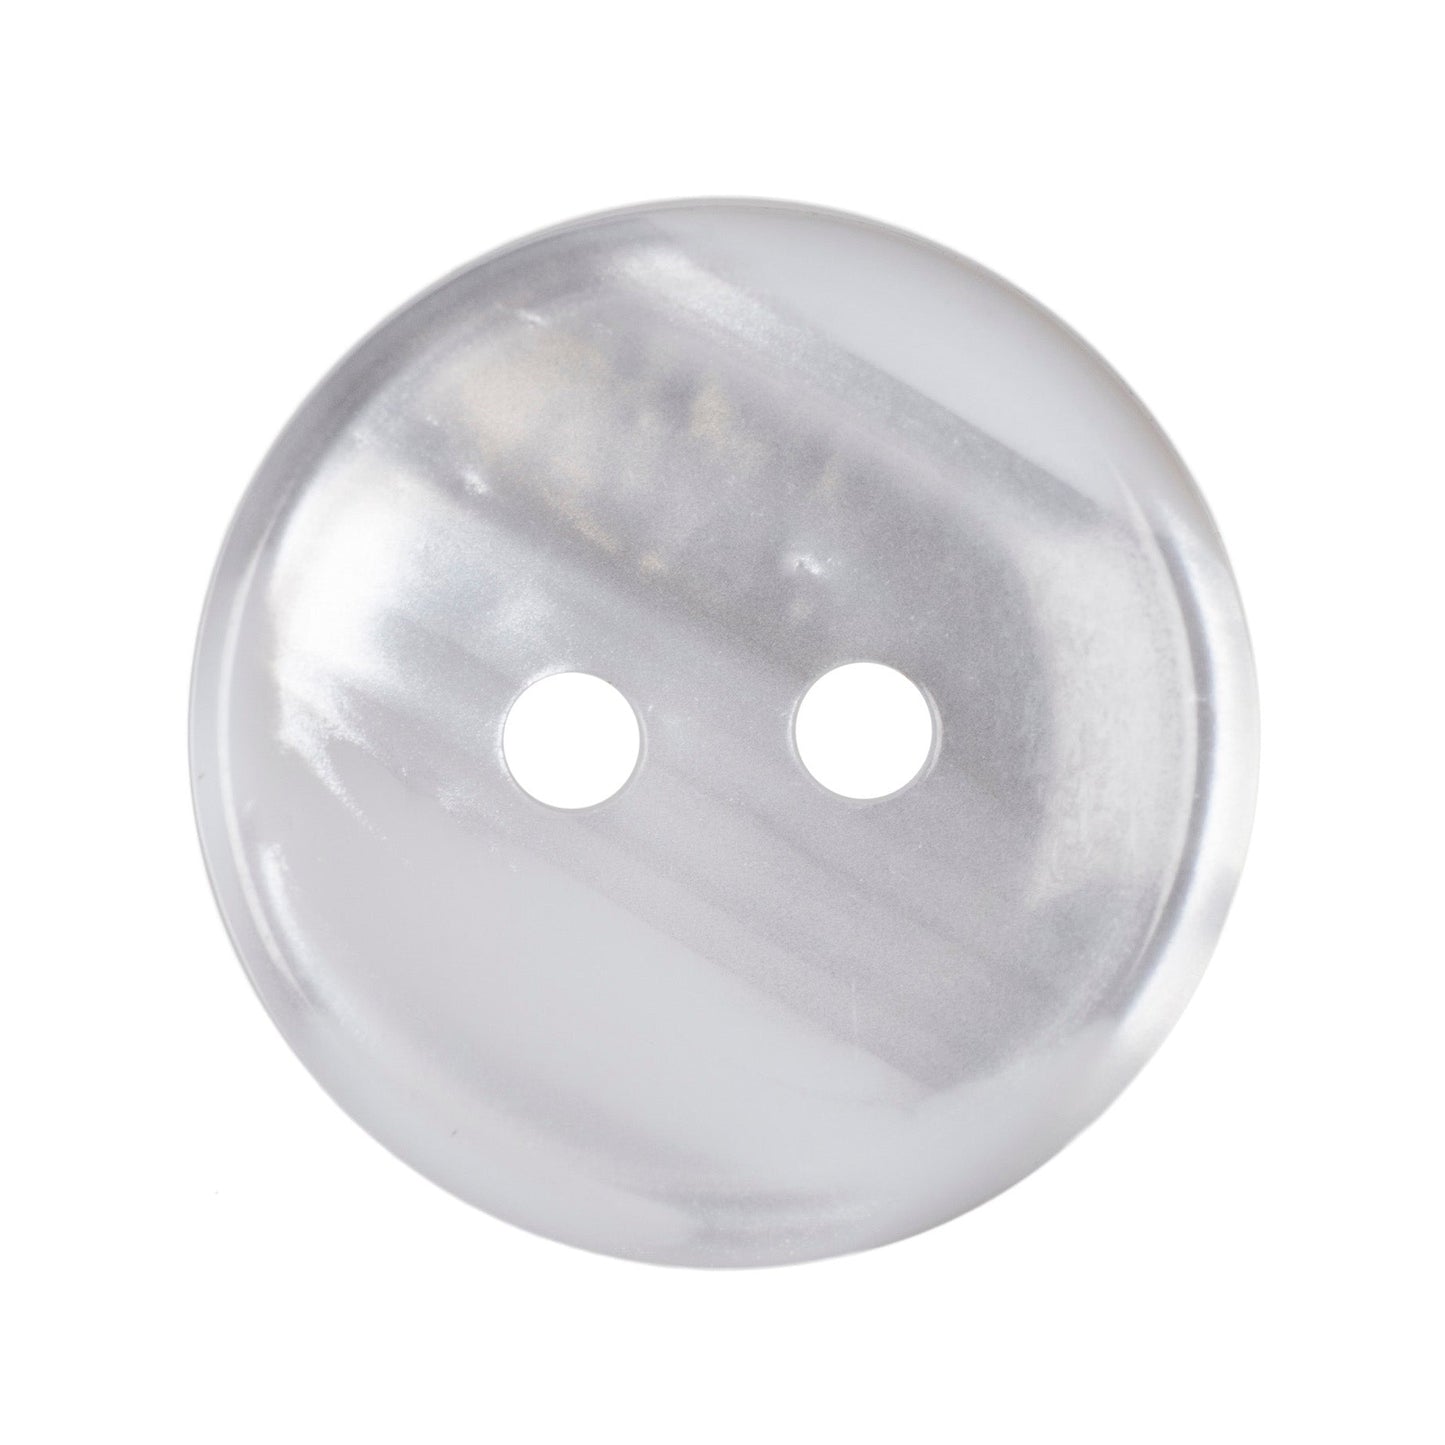 Polyester 2 Hole Stripe Buttons - 18mm - Pearl White [LB21.7]